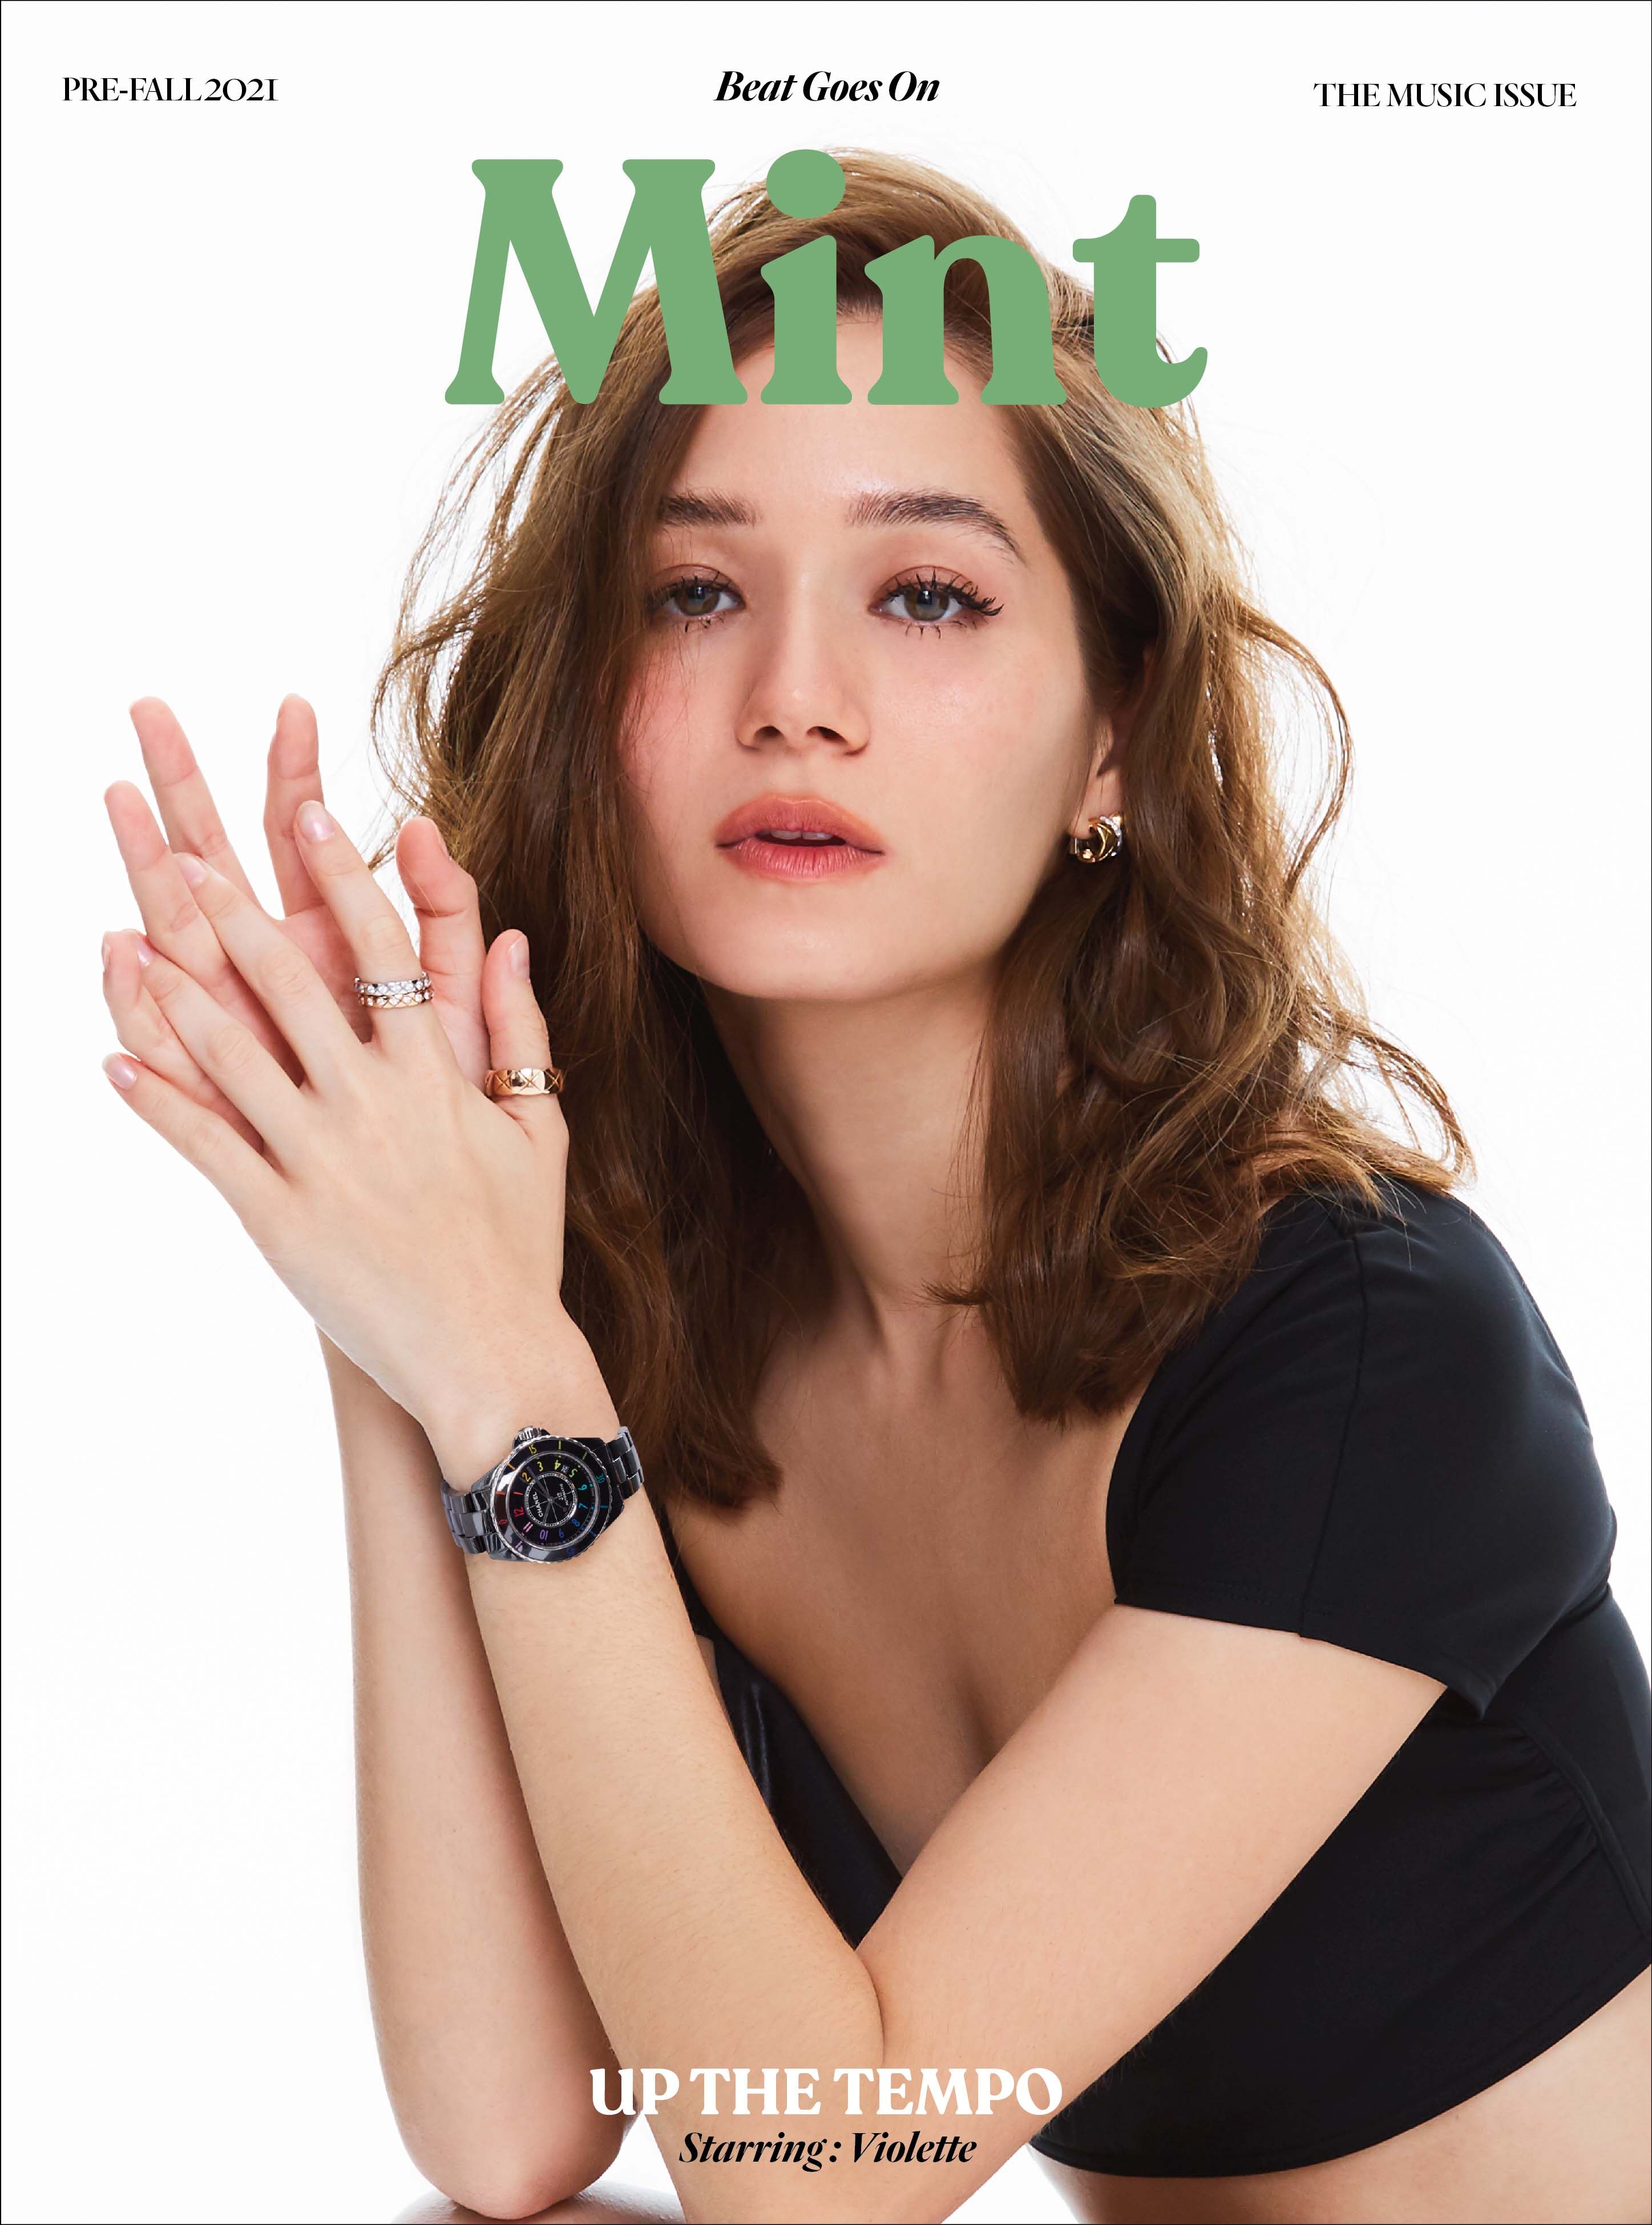 Mint Vol. 5 Pre-Fall 2021 (Cover)  Violette Wautier Music Issue: (Inside) Twopee, Juné, Milli, Ice Paris, PP Krit, Joss Wayar, Mark Siwat, Perth, Newwiee, Cooper, Poy and more